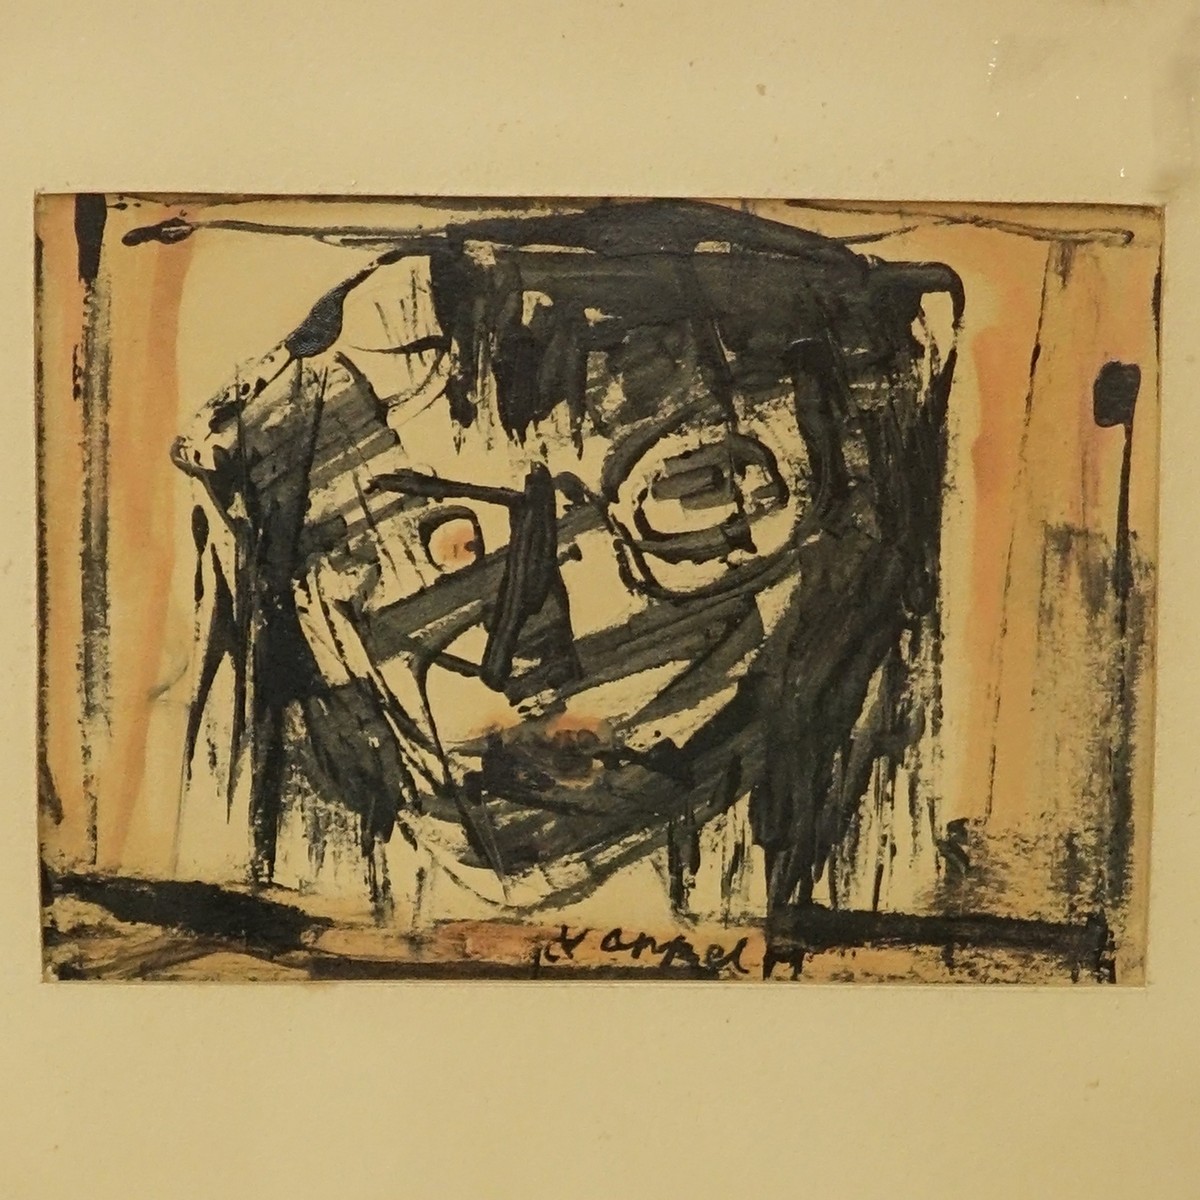 Karel Christiaan Appel, American (1921 - 2006) Ink and watercolor on paper "Head" Signed Lower center. Possibly 1950.